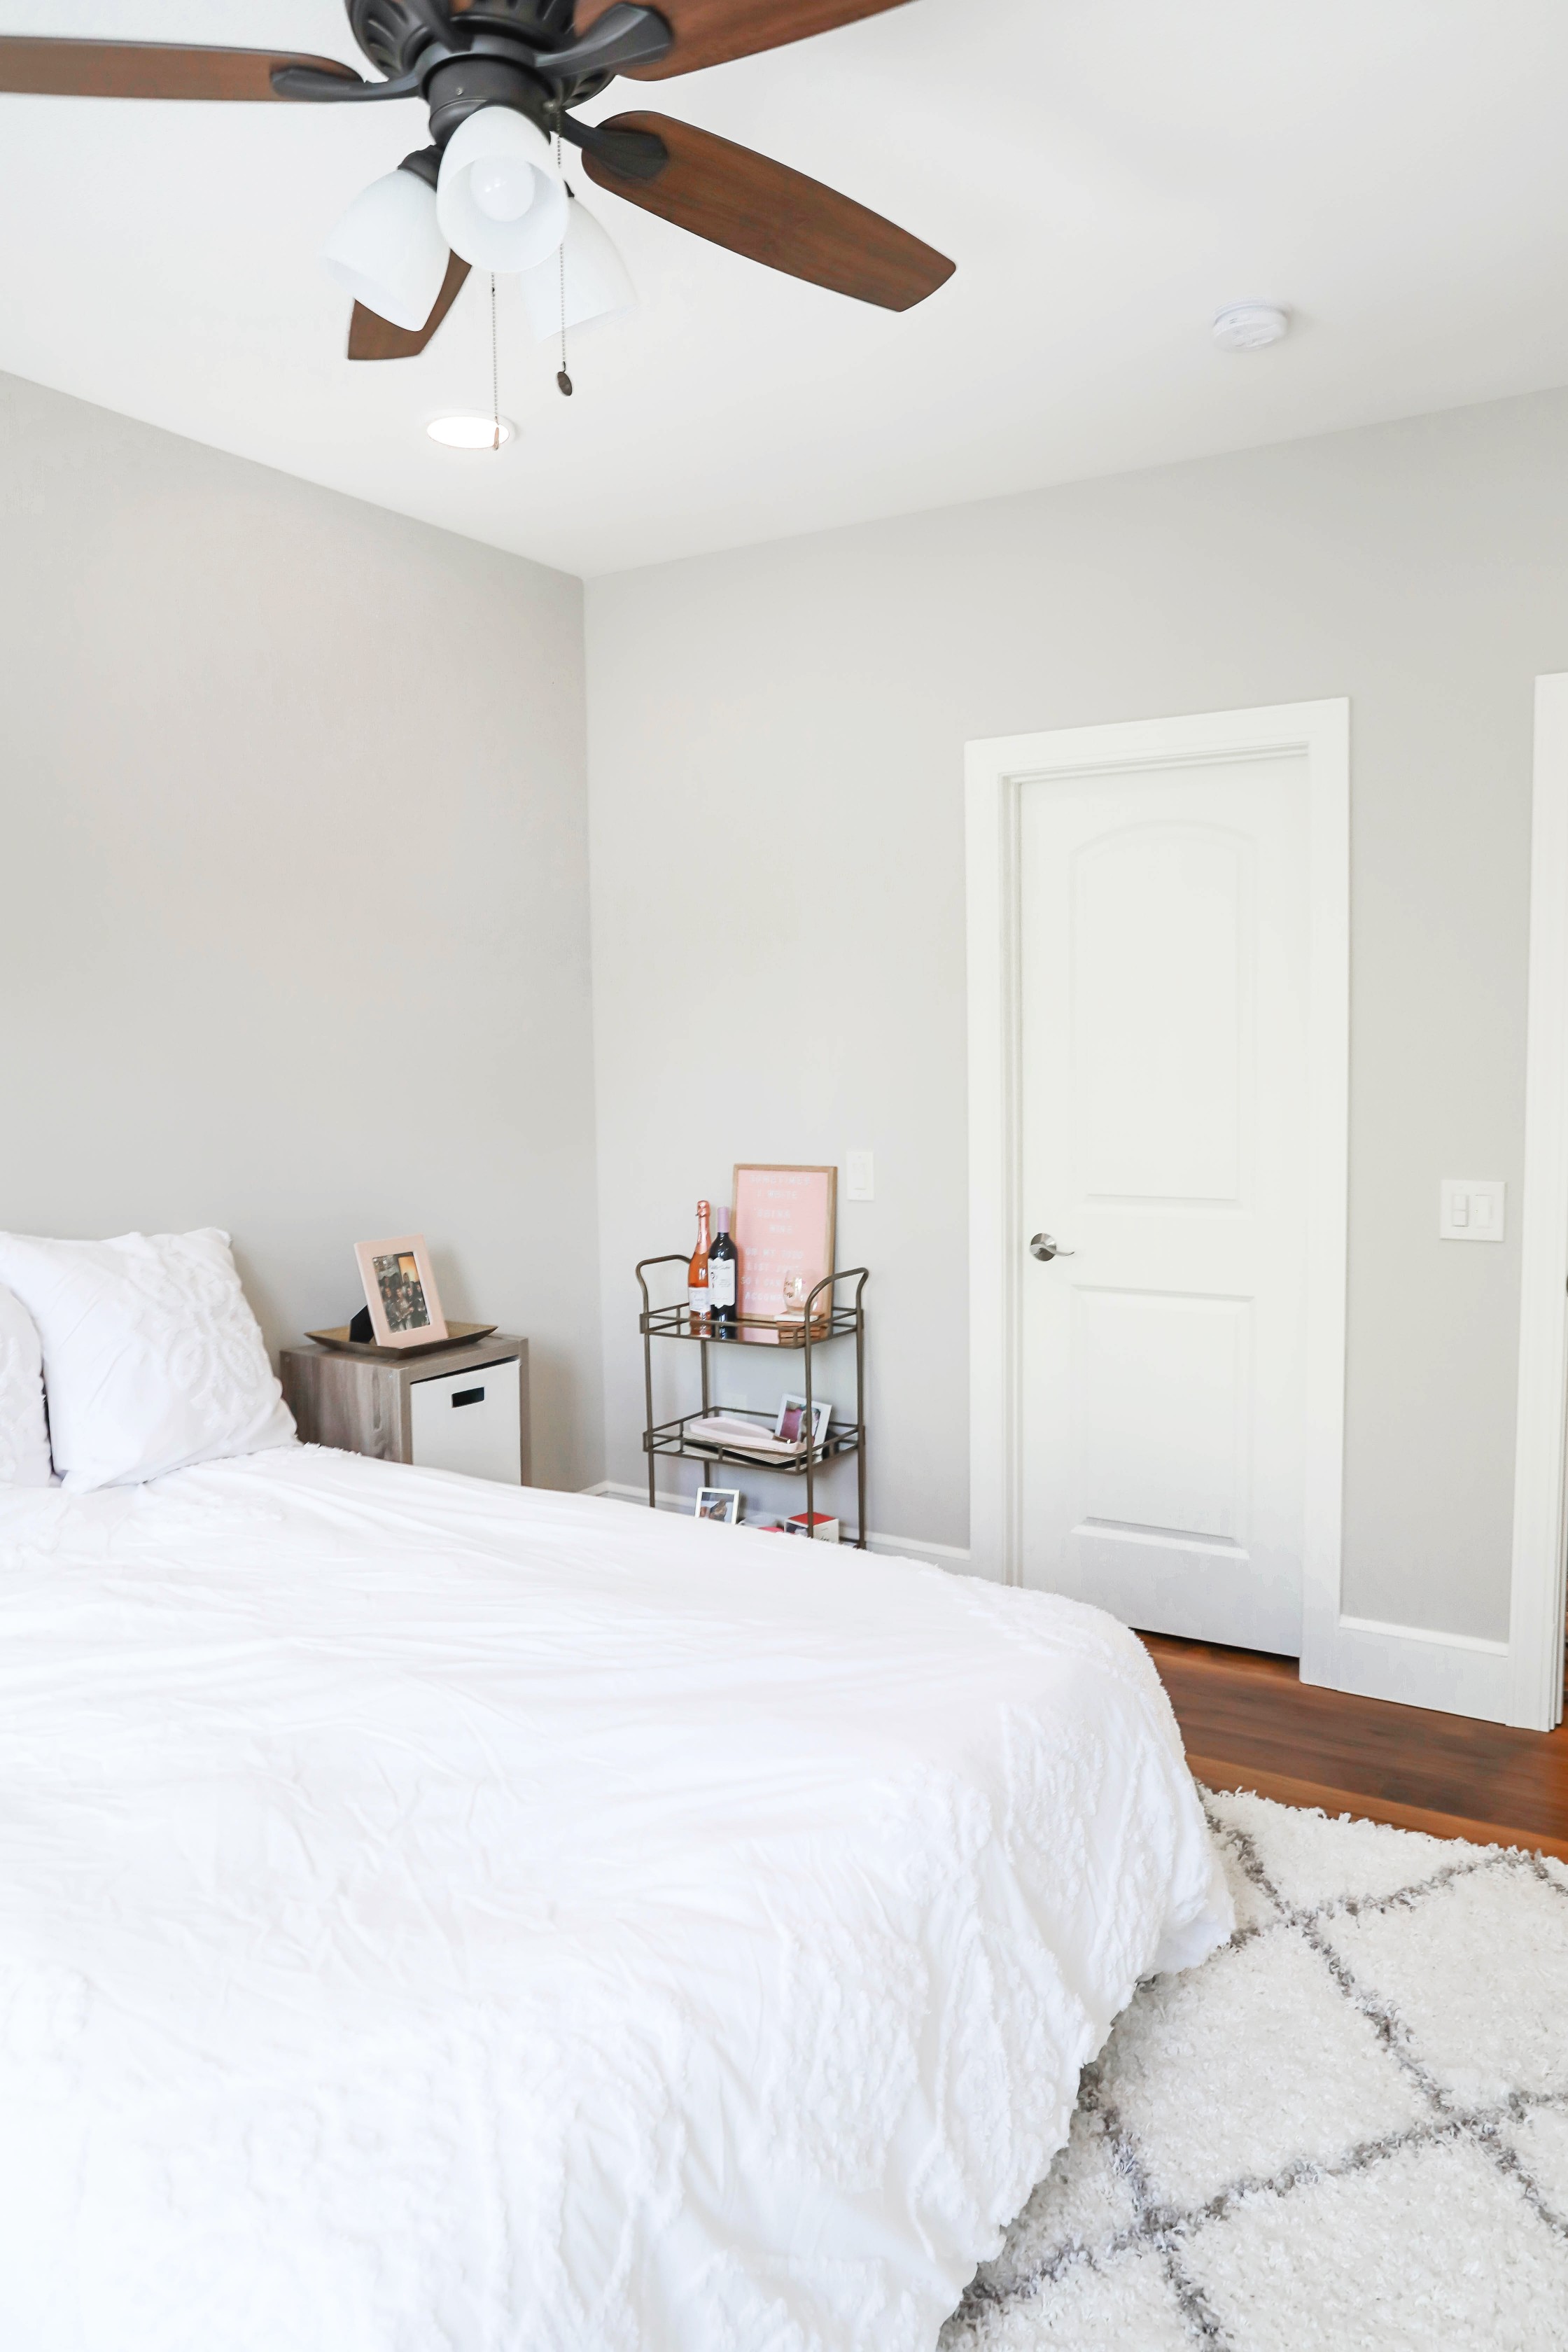 I moved! Sneak peak apartment tour for my white and gray room! I love simple and elegant apartment decor! My nuloom rug looks so good with my white furniture! Details on daily dose of charm by lauren lindmark